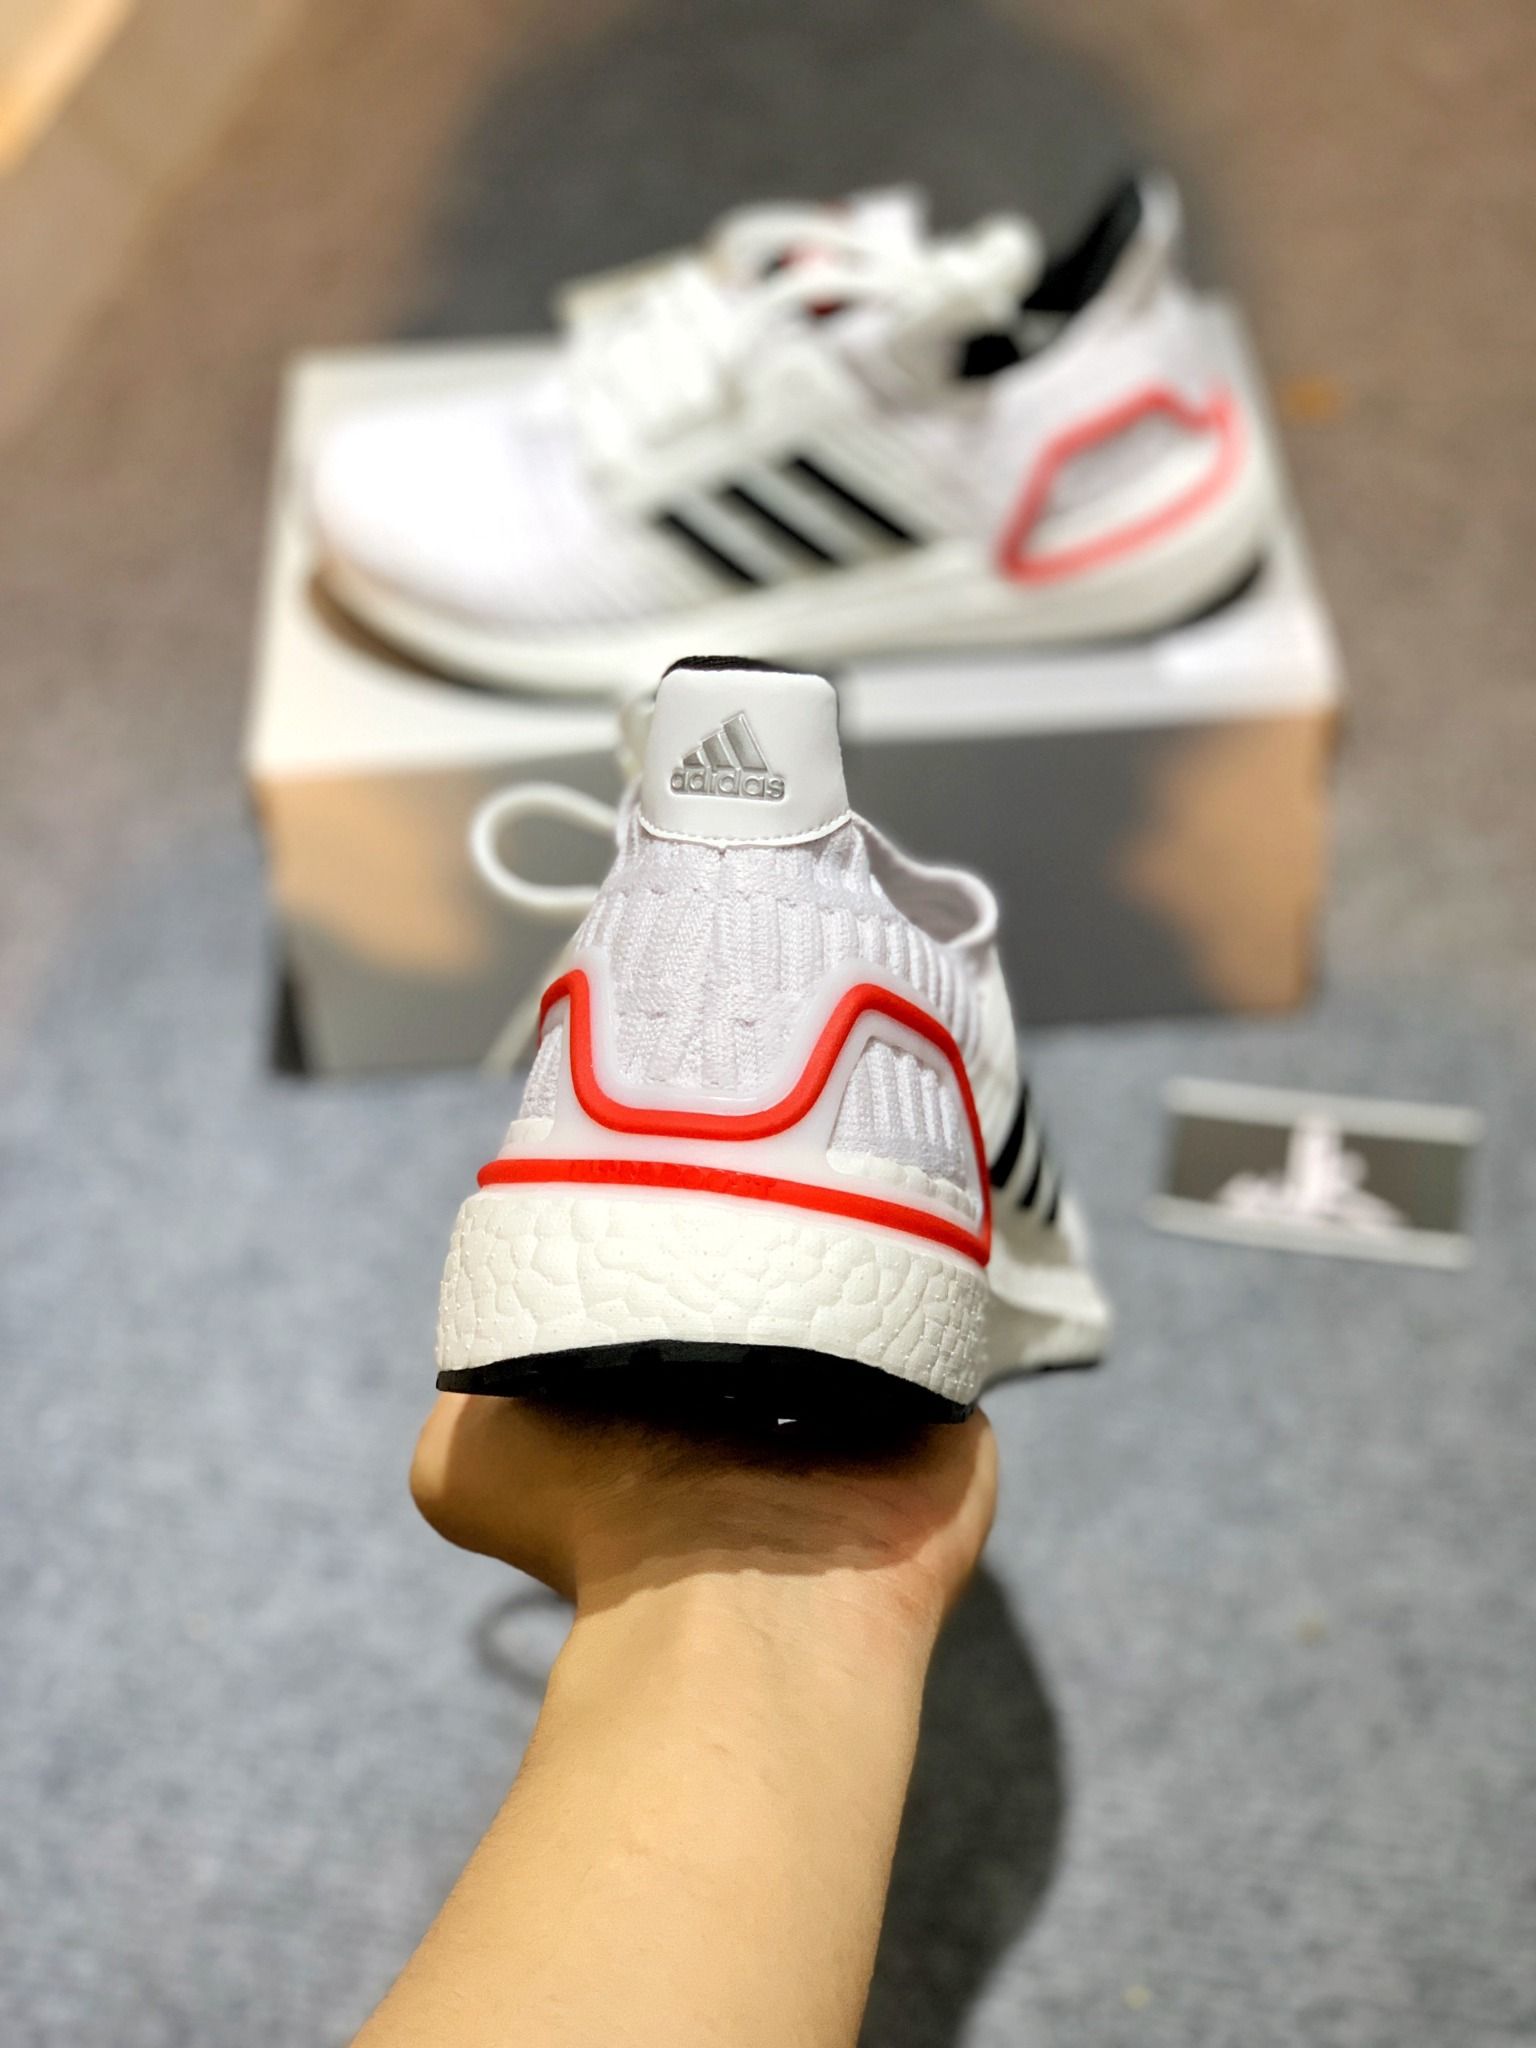  GZ0439 Ultraboost ClimaCool_1 DNA White Red Black 